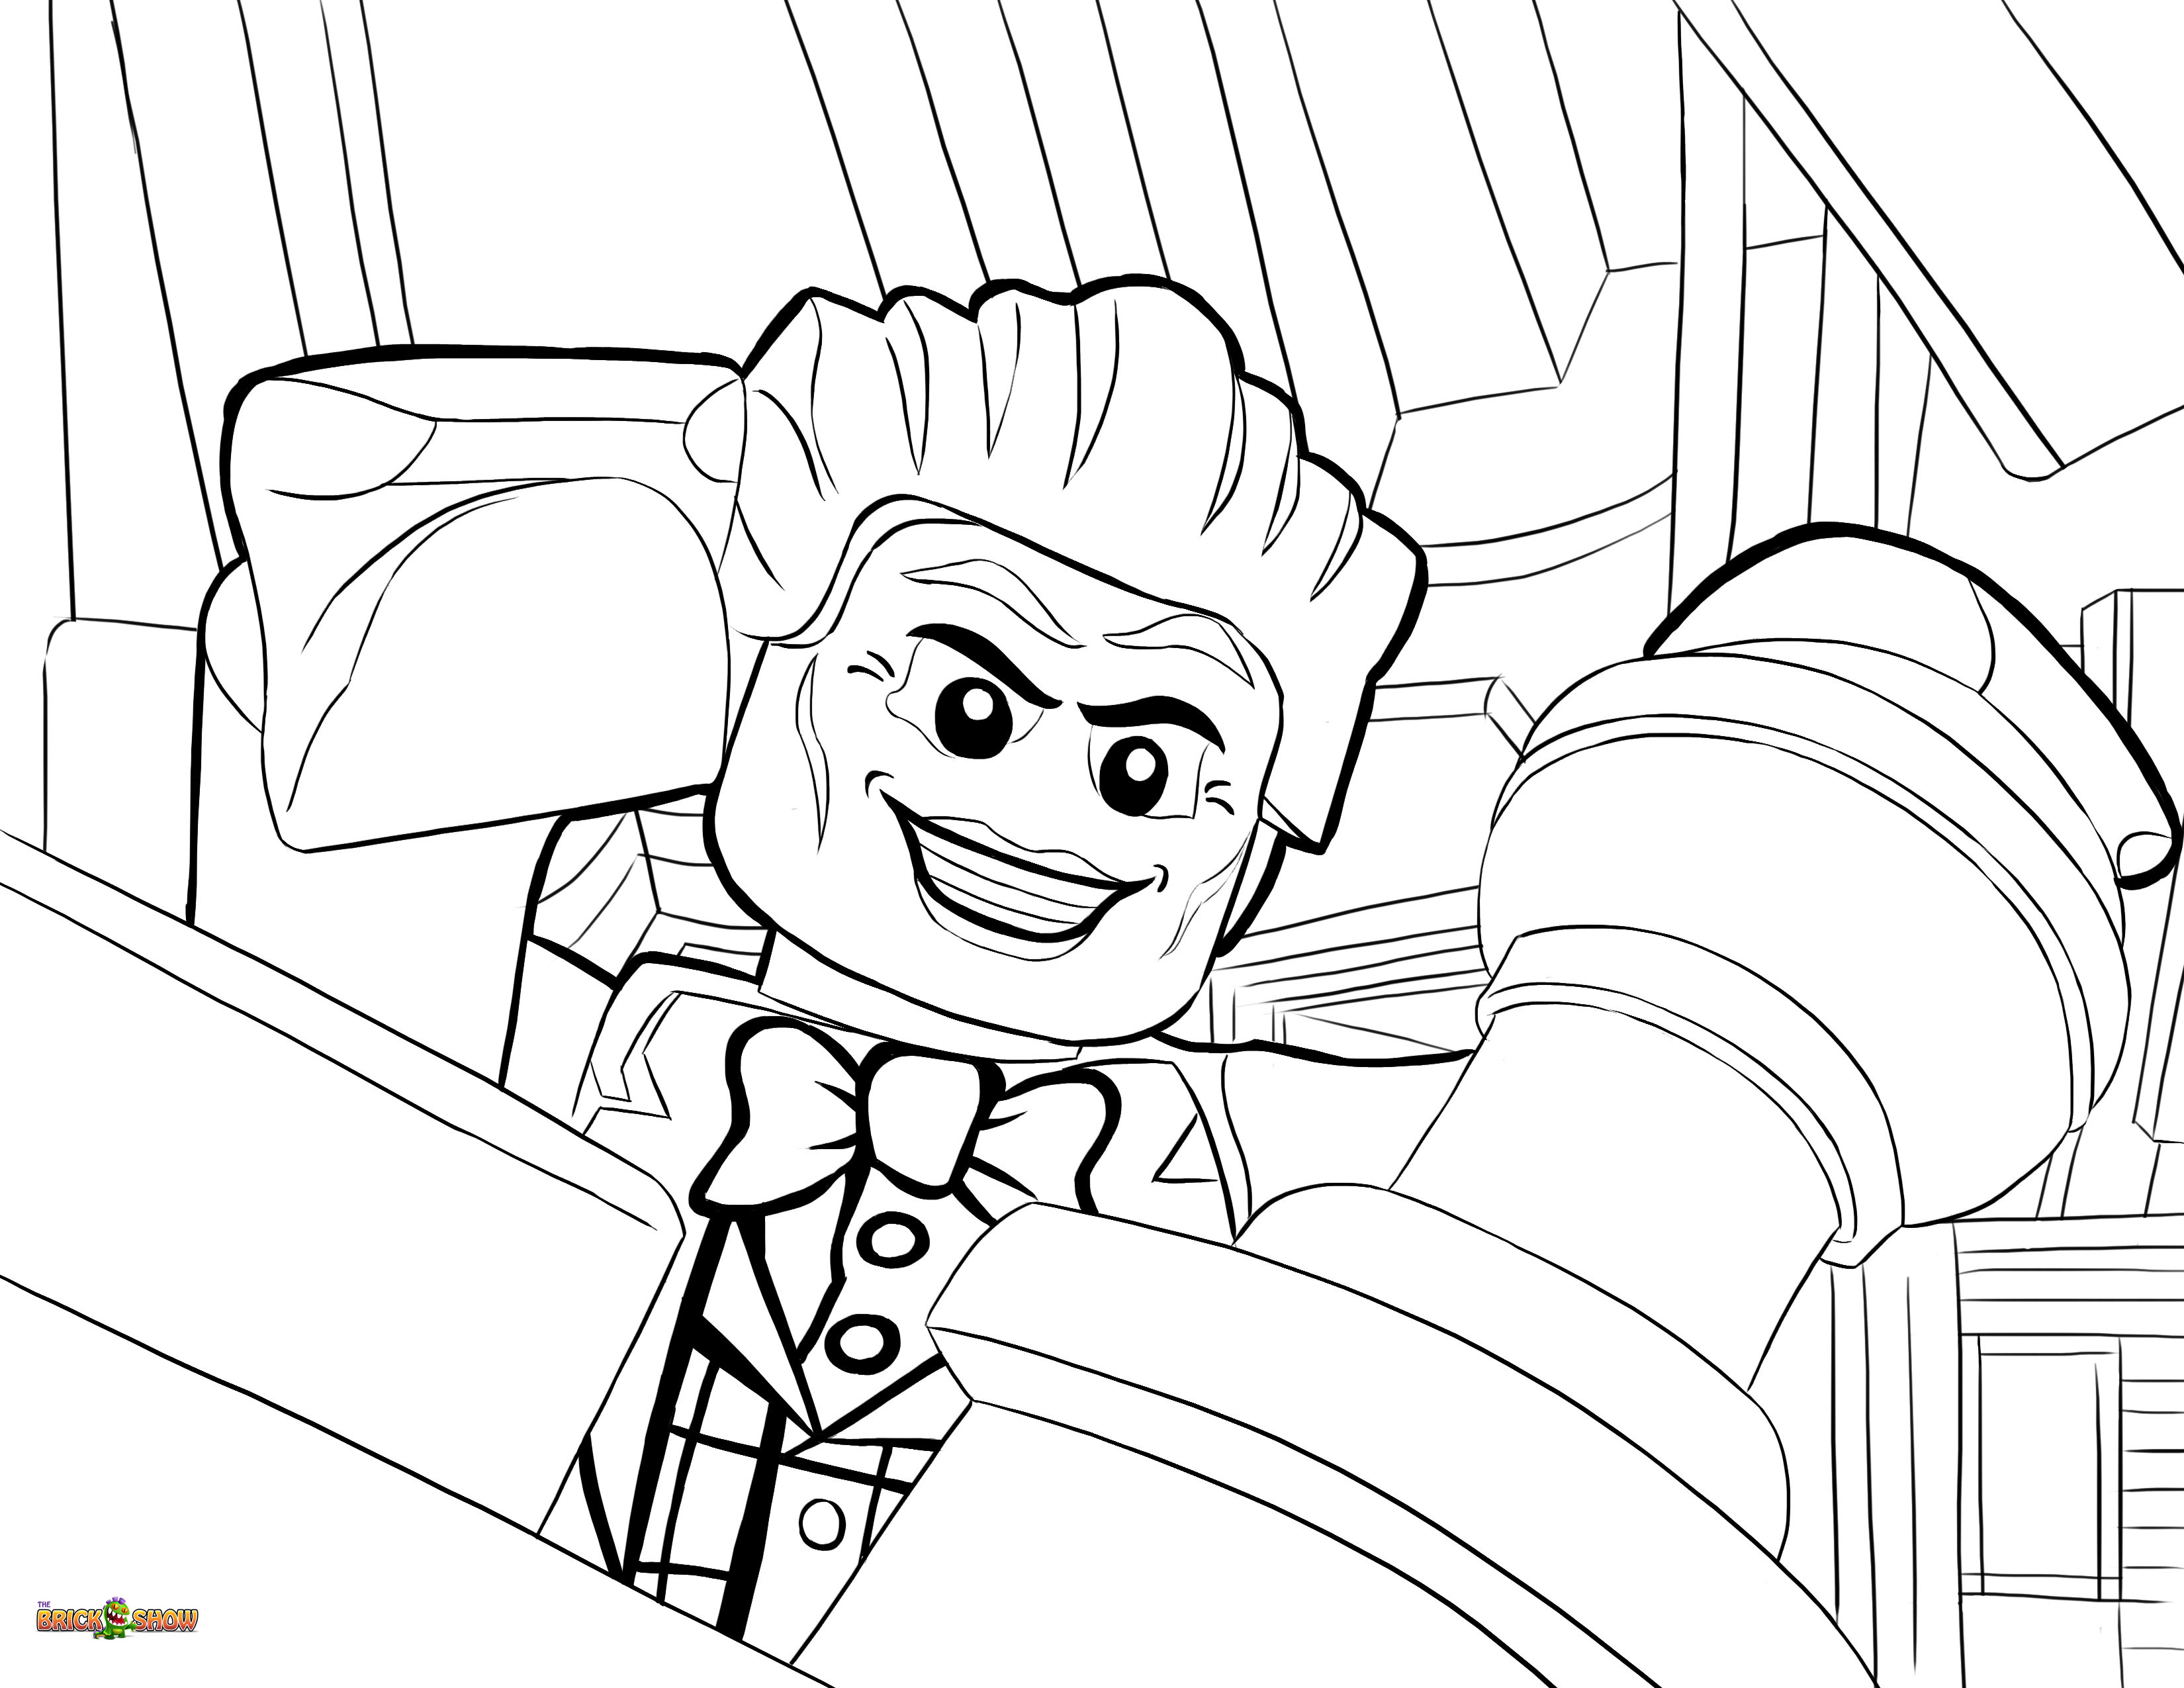 Lego superman coloring pages